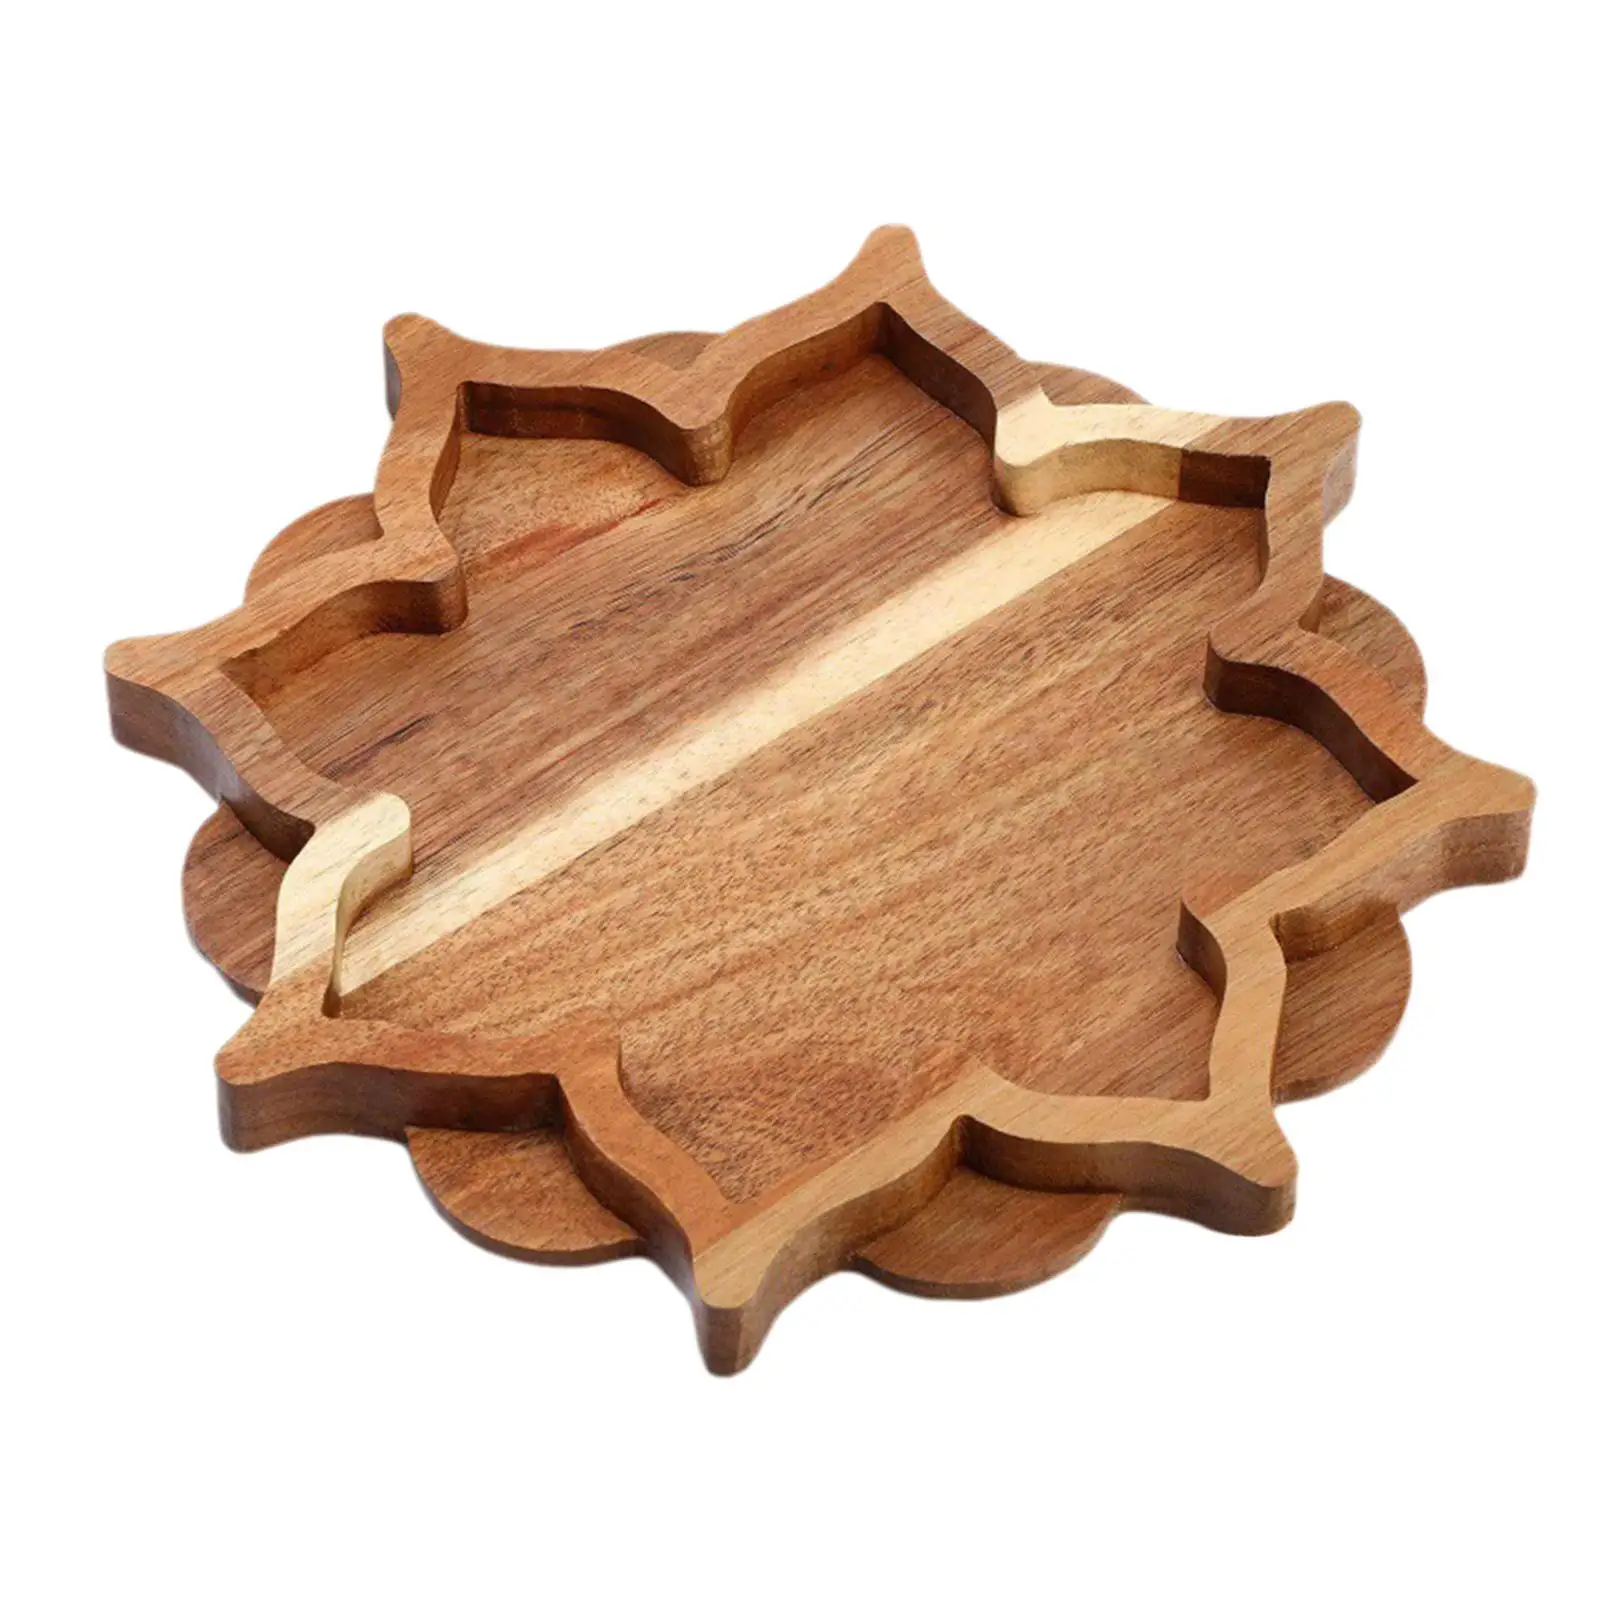 Wooden Crystal Tray Jewelry Tray Multi Use Crystal Holder for Stone Crystal Organizer for Countertop Gift Centerpiece Home Decor